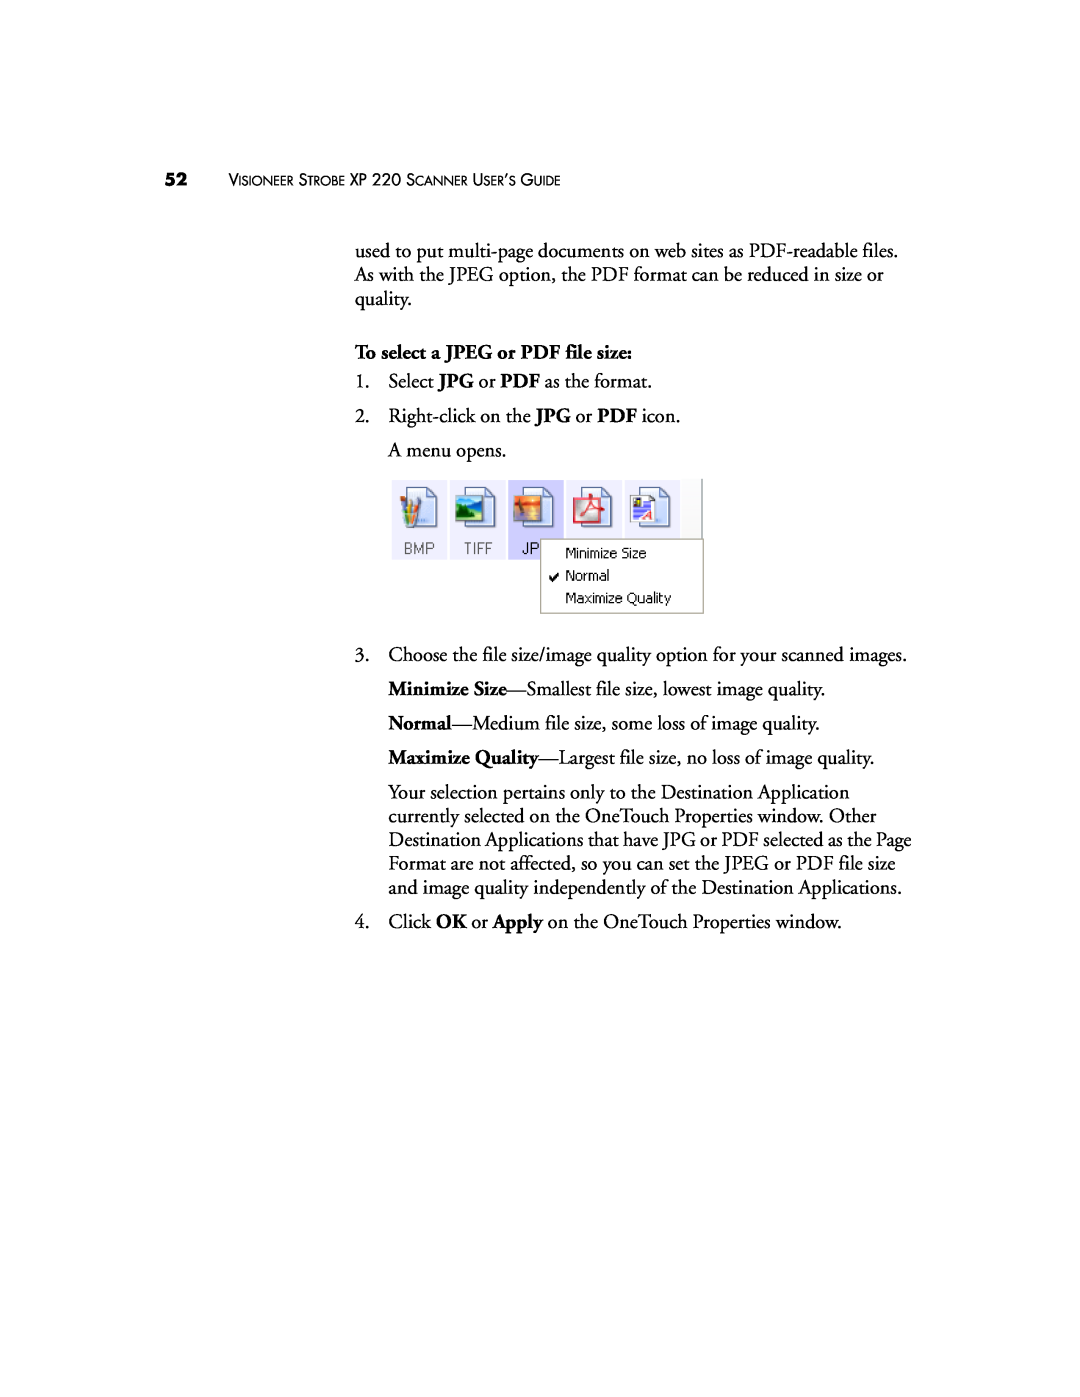 Visioneer XP220 manual To select a JPEG or PDF file size 